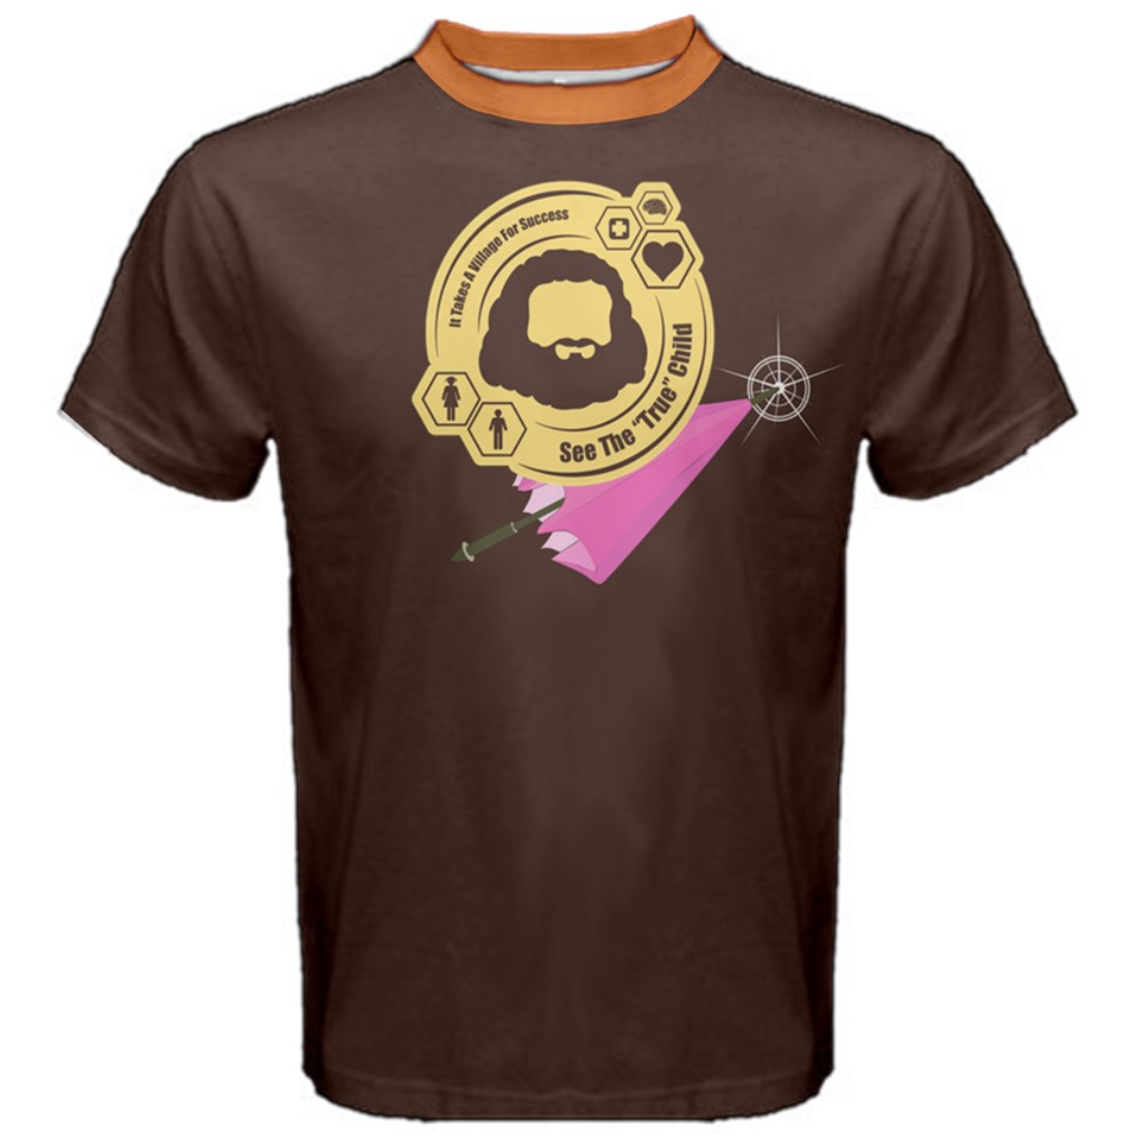 See The "TRUE" Child (Simple Brown) Cotton Tee - Inspired by Literary Character, Hagrid